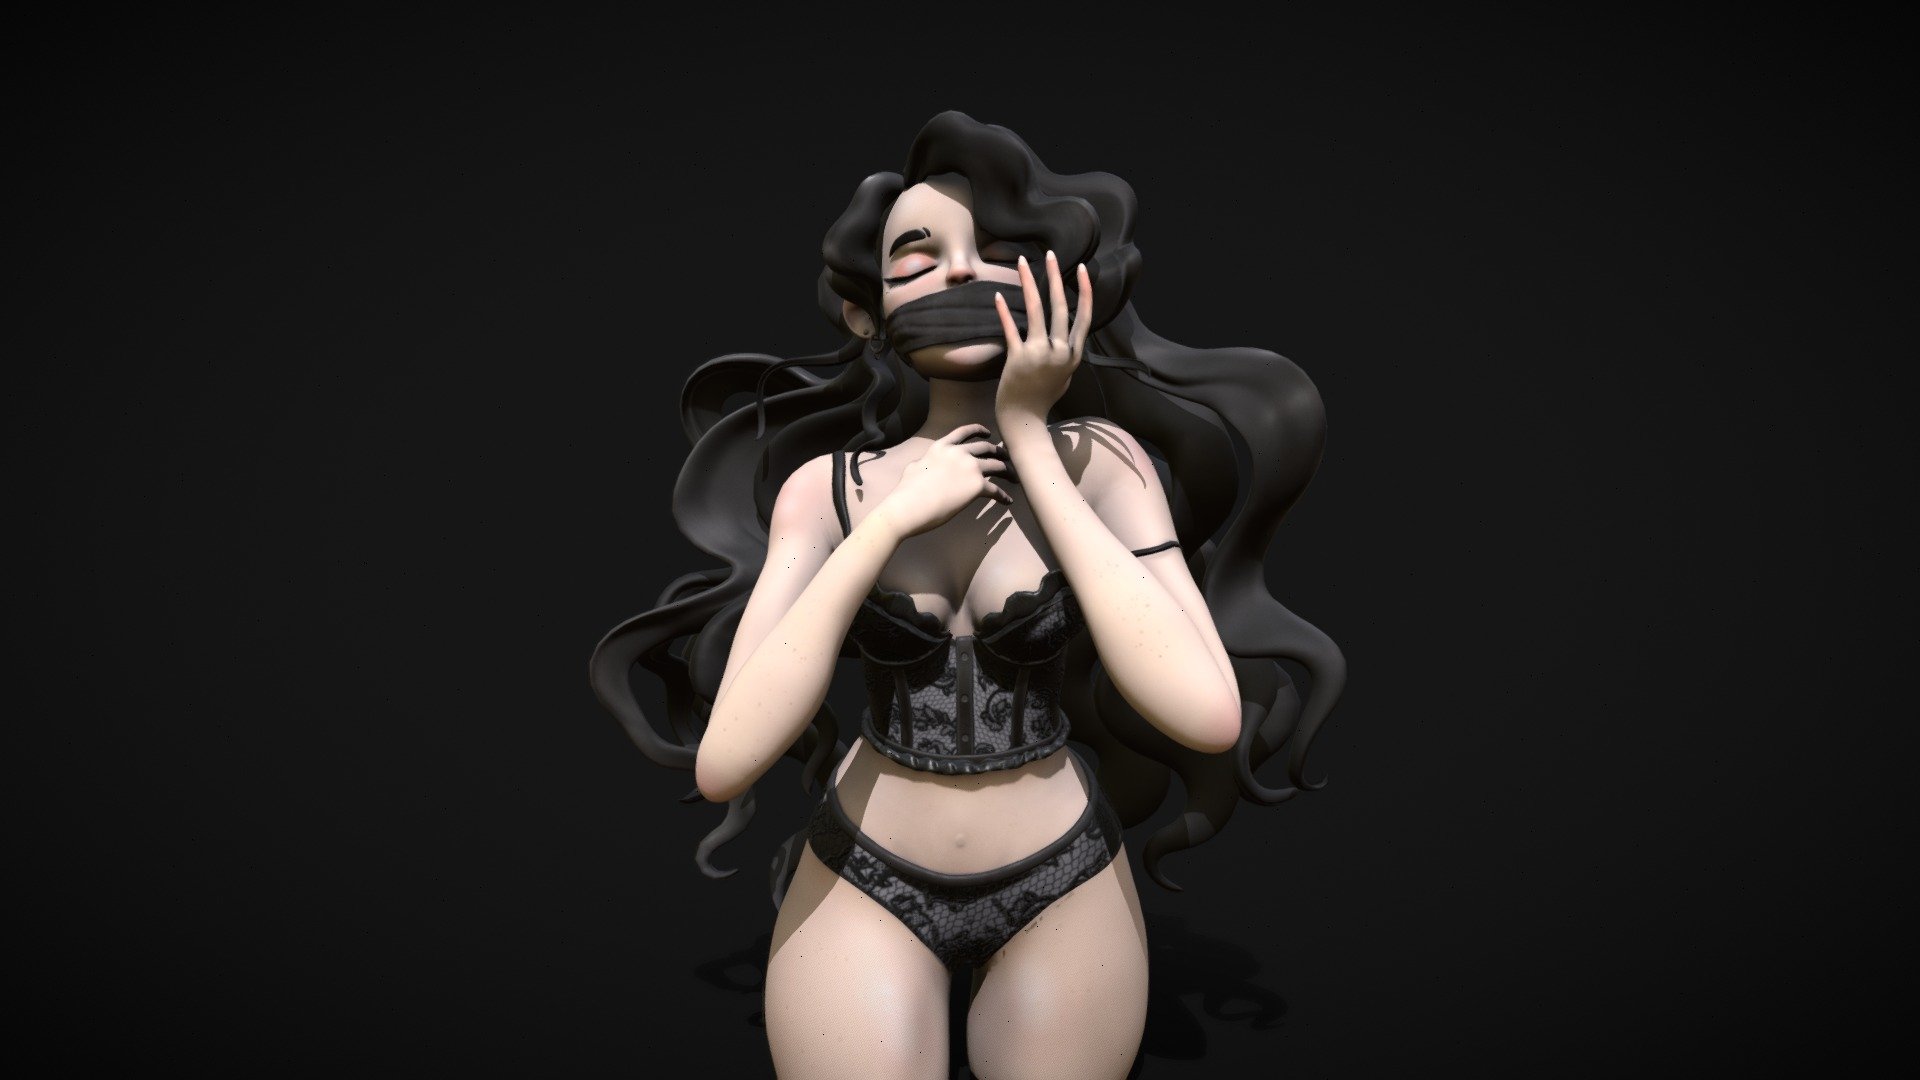 Hello! This represents a 3D version of one of my 2d artistic creations. 

I'm used Zbrush, 3ds Max and Substance painter - Darkness Women - 3D model by Lea_Moureaux (@lelemrx) 3d model